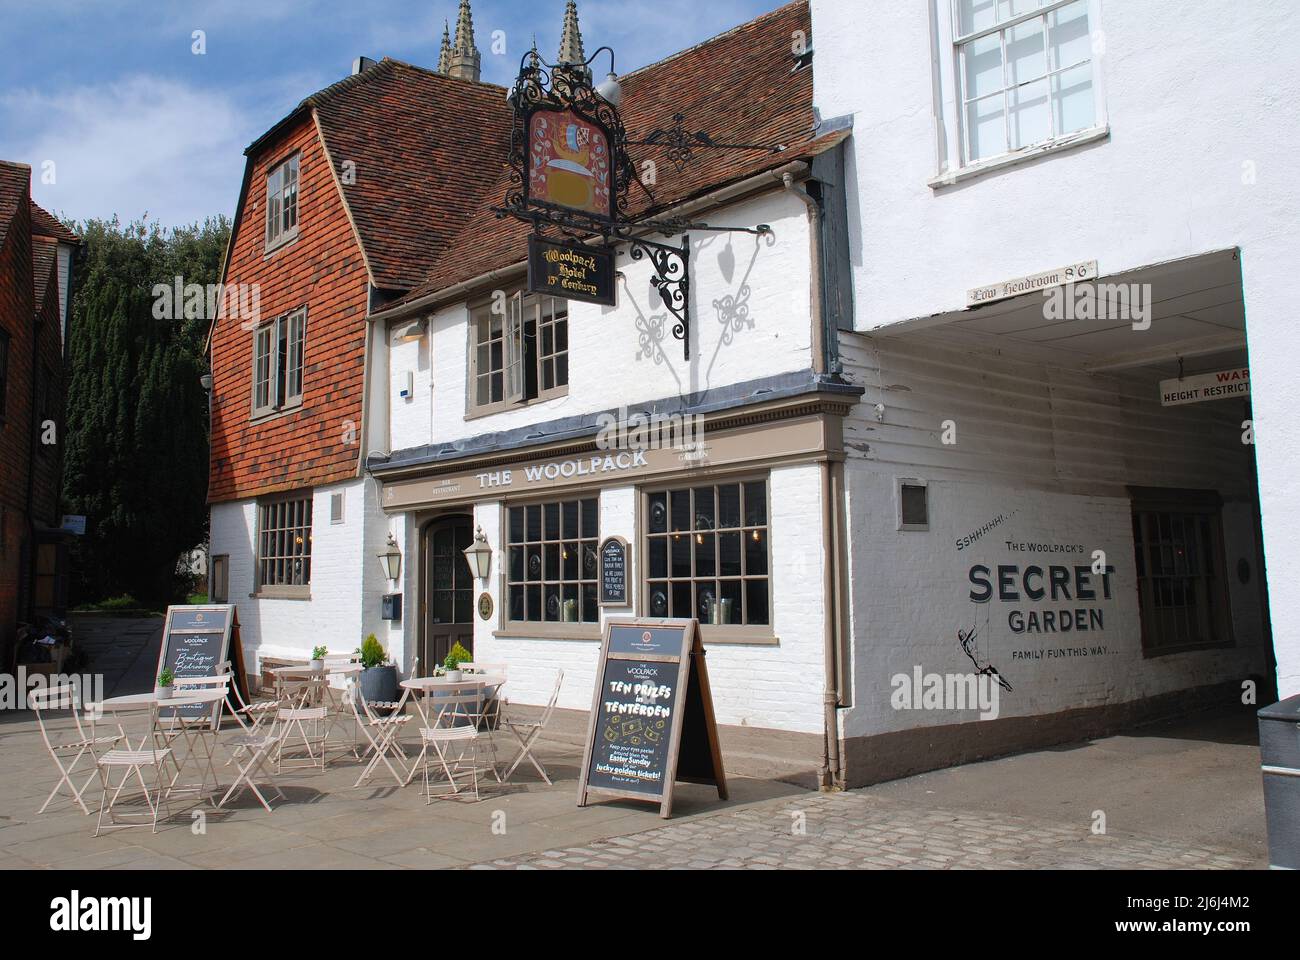 The Woolpack Inn and Hotel in the High Street at Tenterden in Kent, England on April 11, 2022. The historic coaching inn dates from 1478. Stock Photo